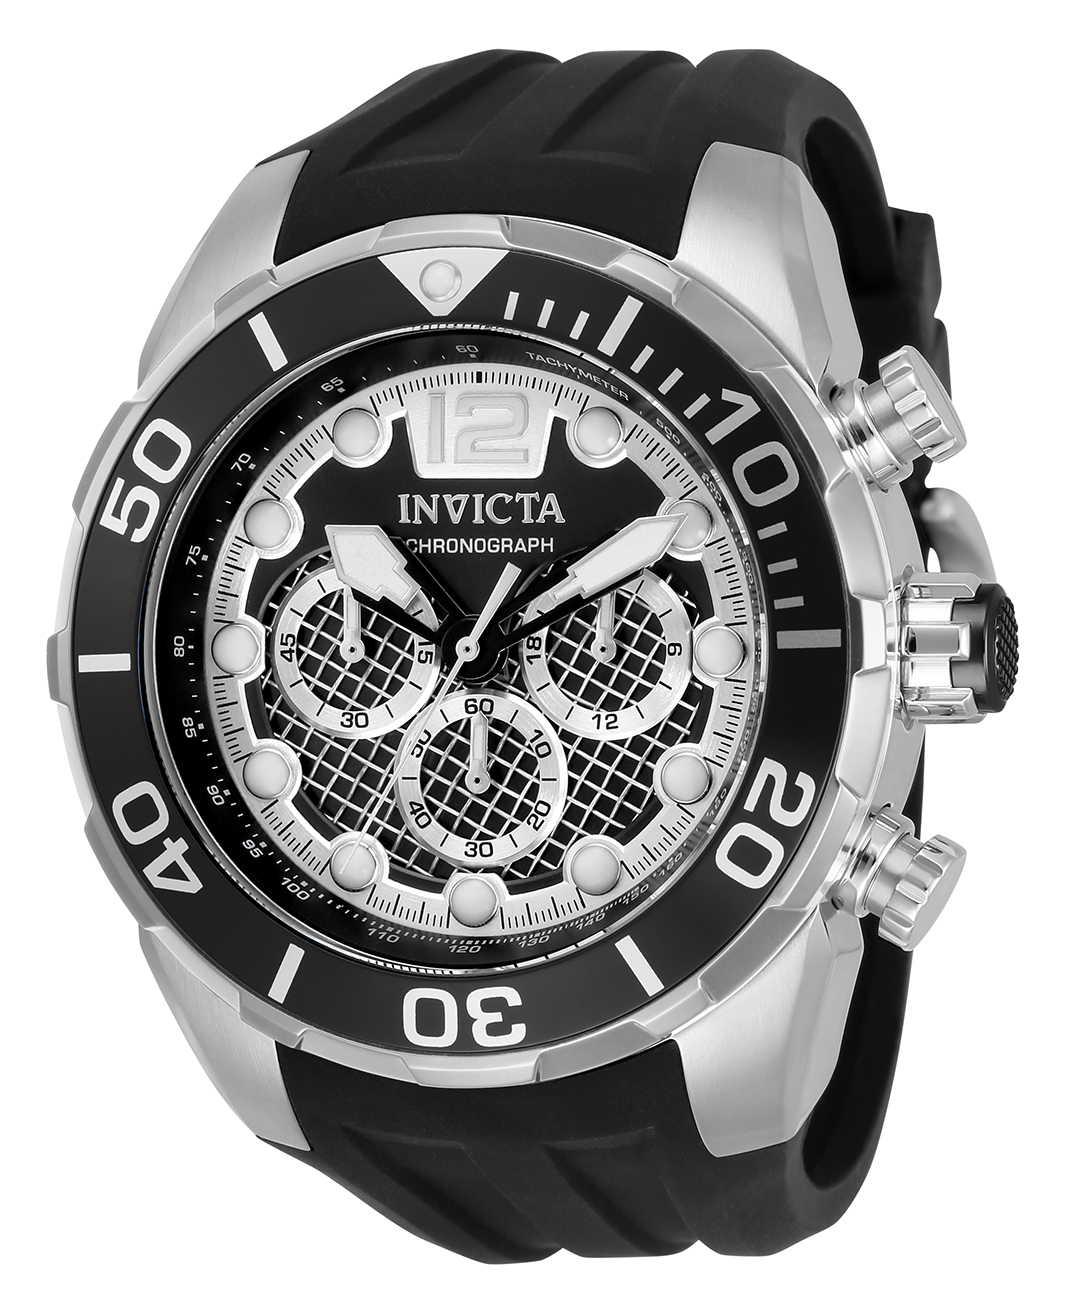 Invicta Pro Diver Quartz Mens Watch - 50mm Stainless Steel Case, Silicone Band, Black (33820)